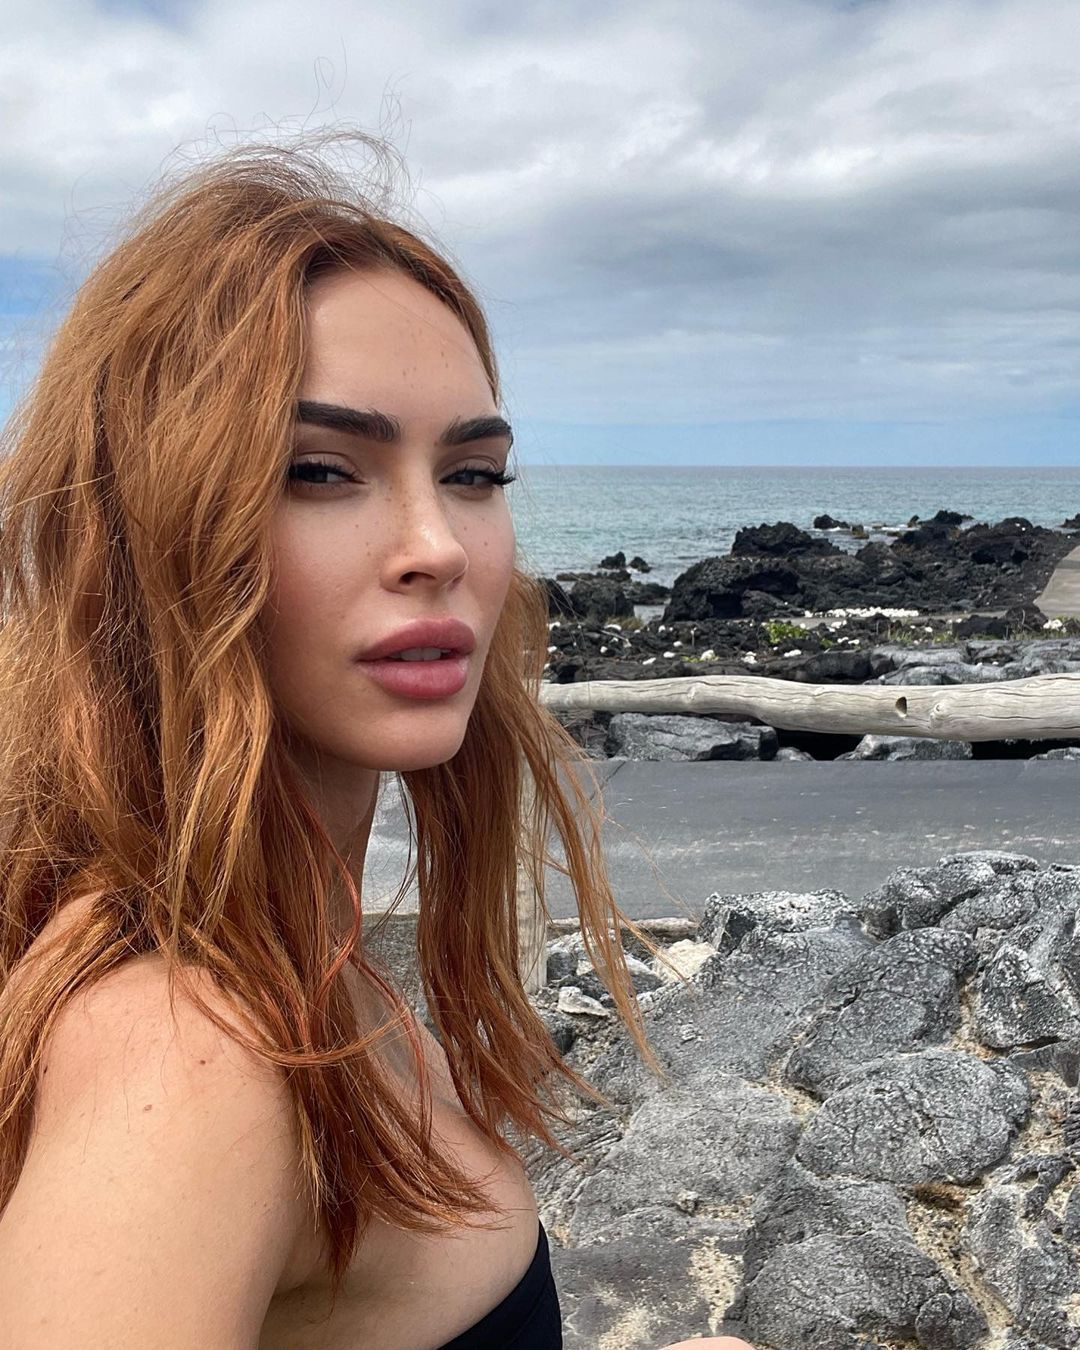 Megan Fox Makes Her Instagram Return With A Sultry Bikini Photo